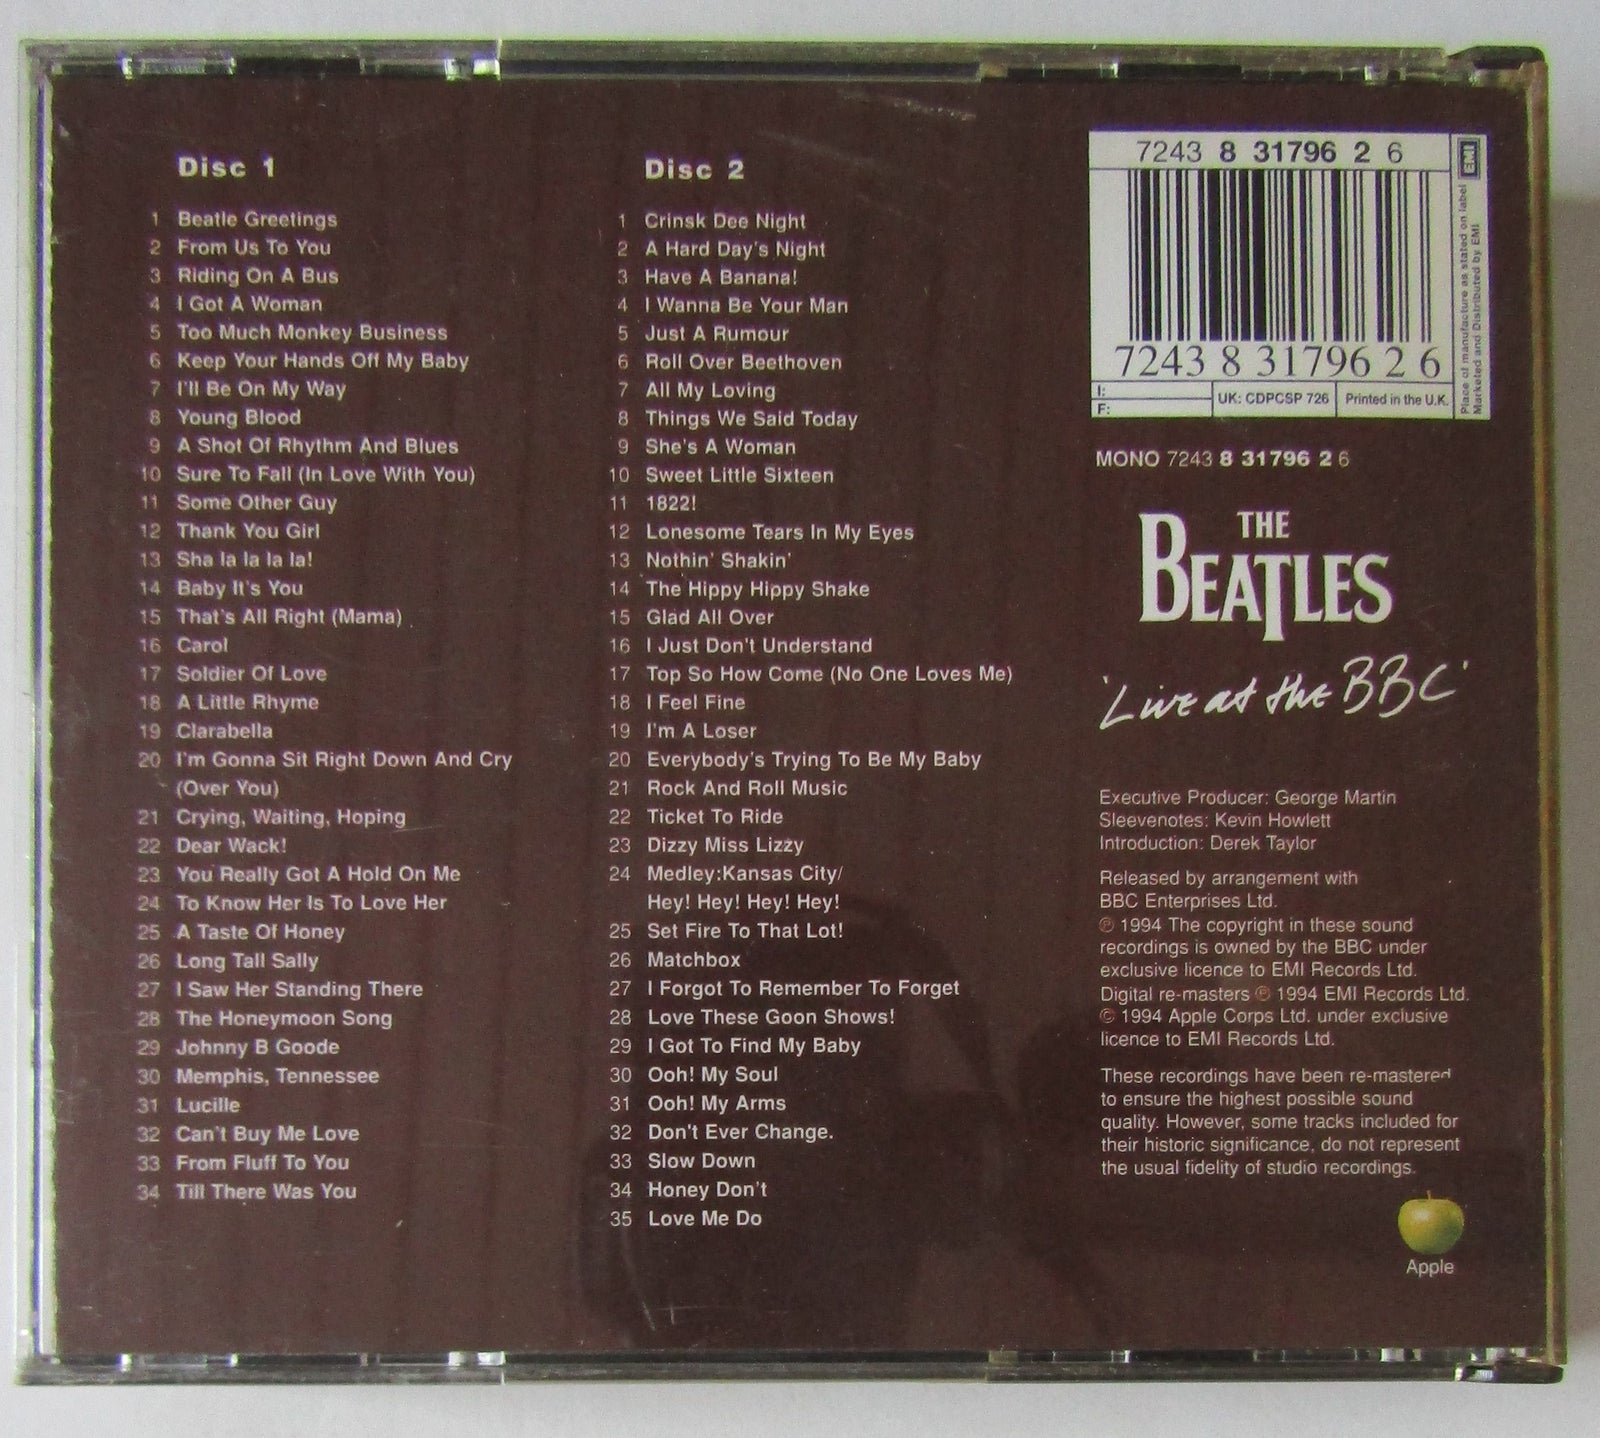 The Beatles: Live at the BBC, pop